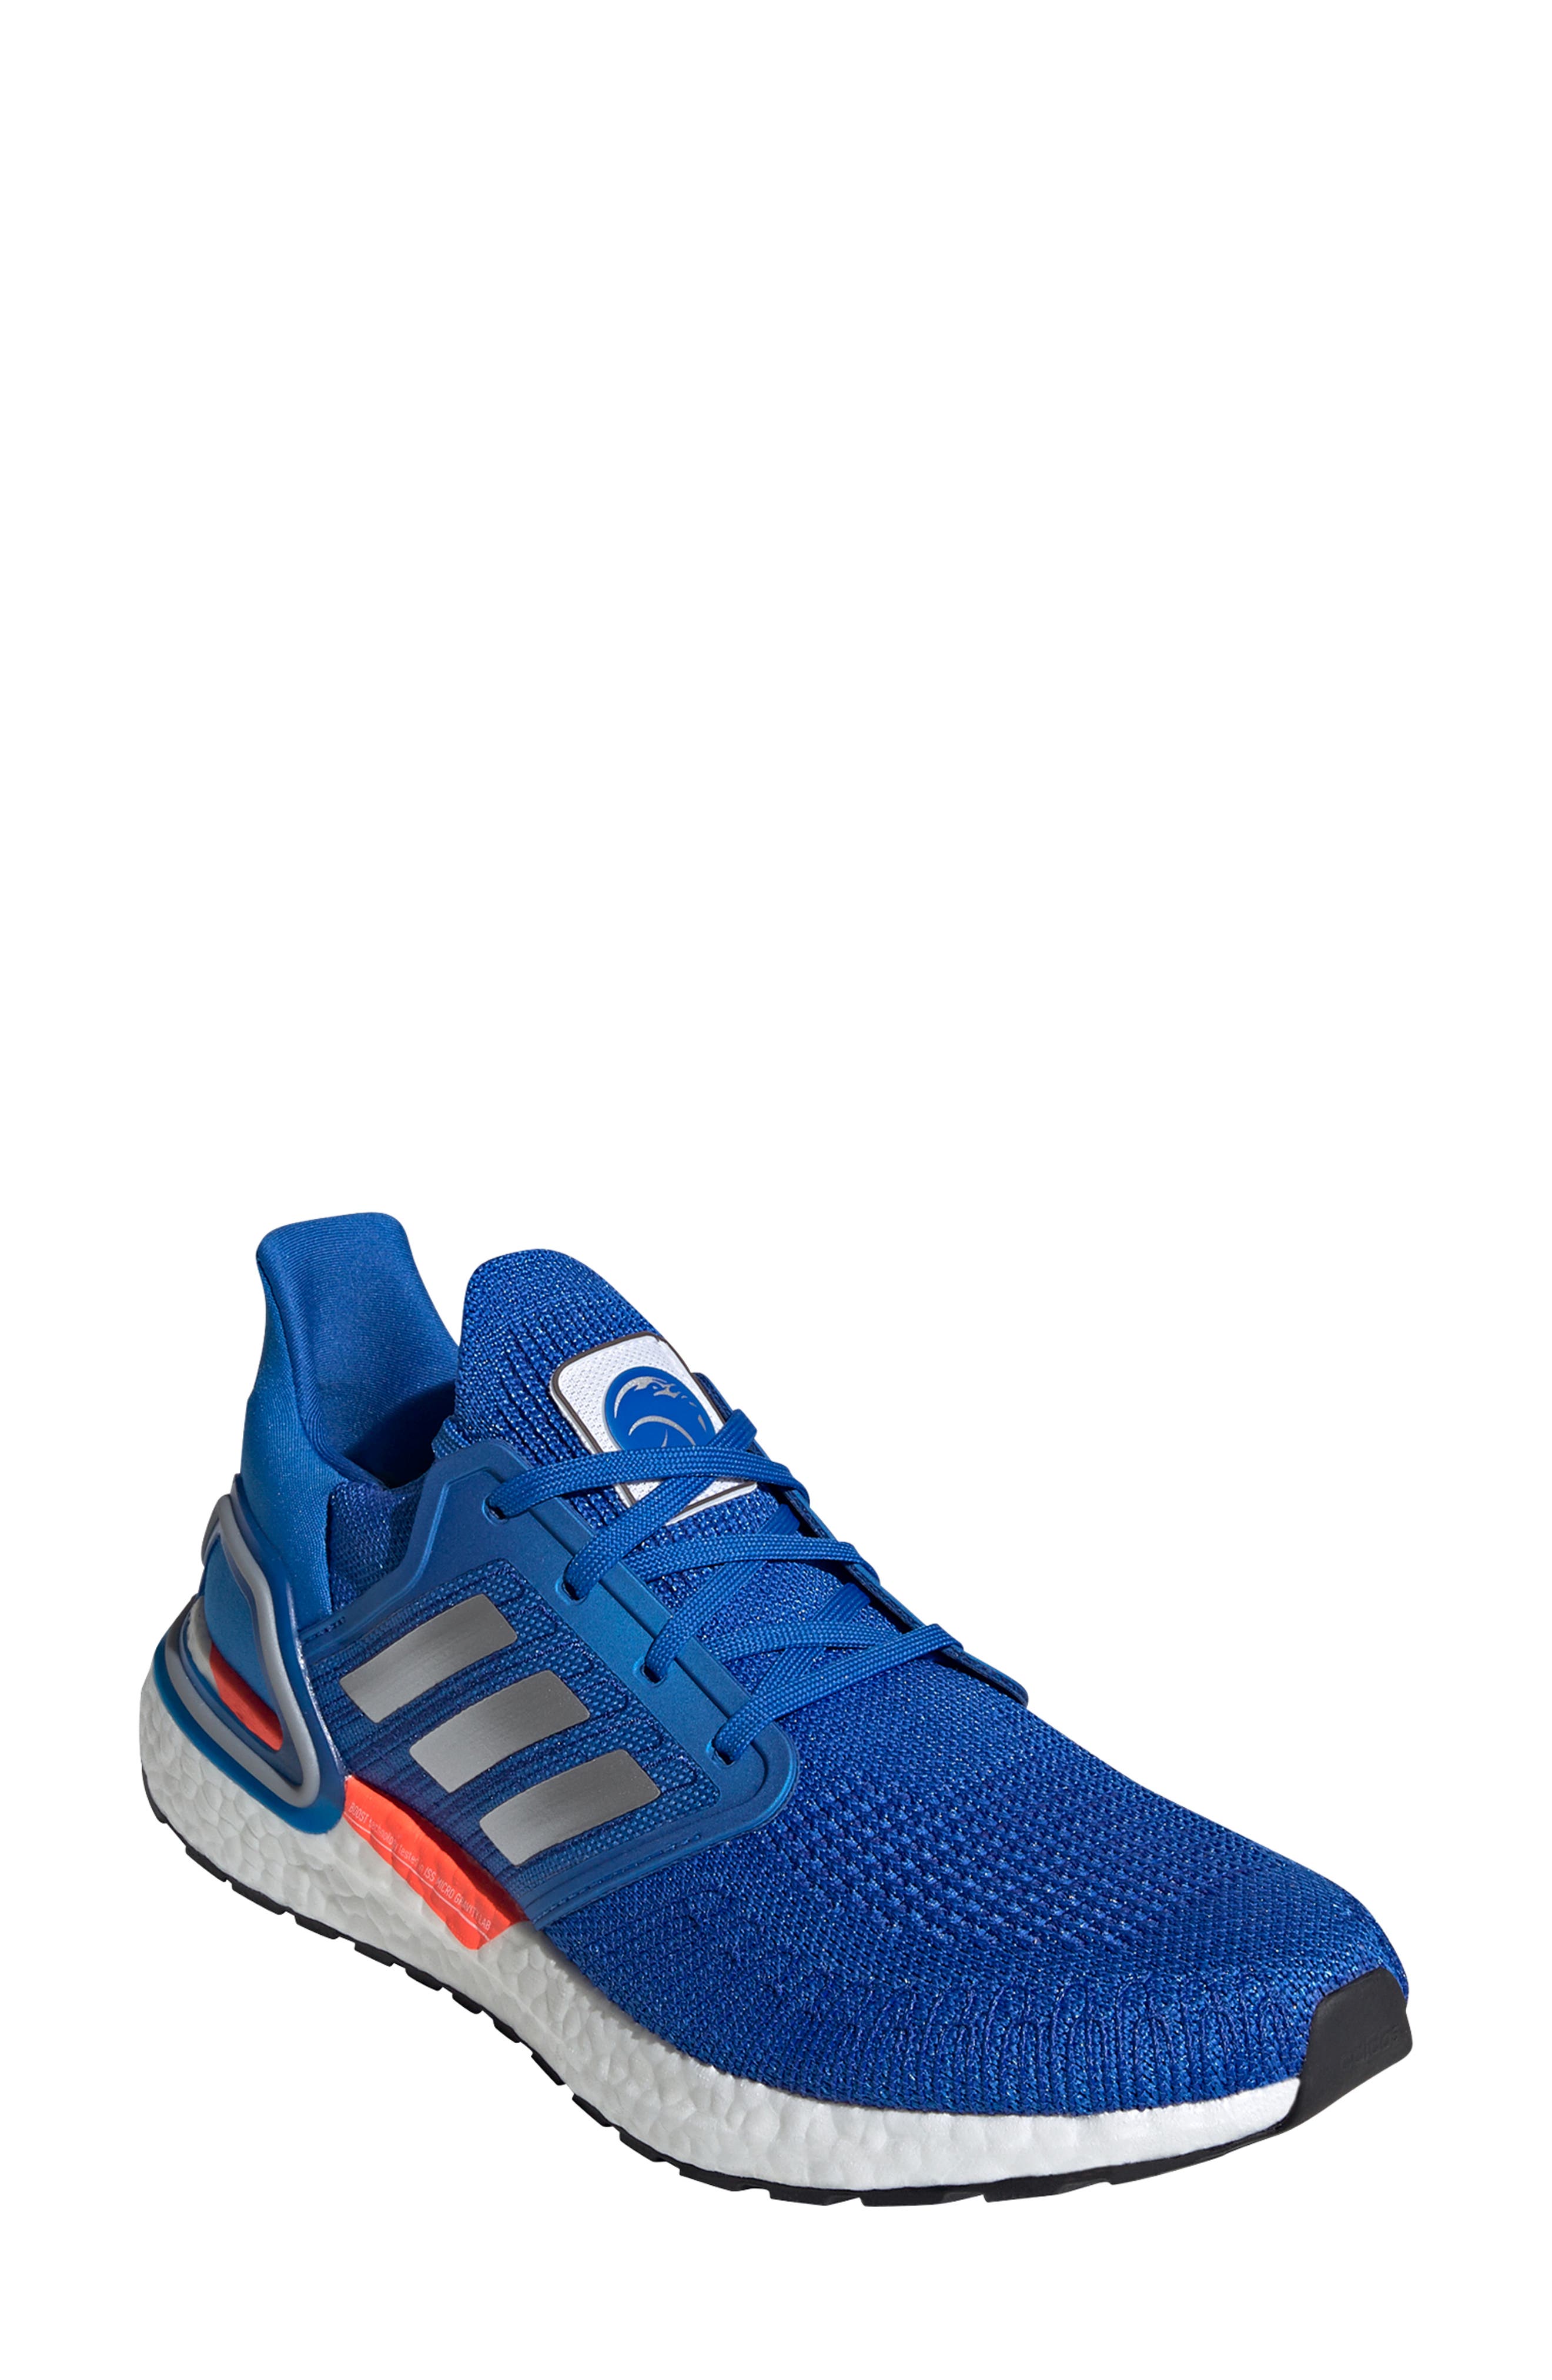 adidas mens stability running shoes